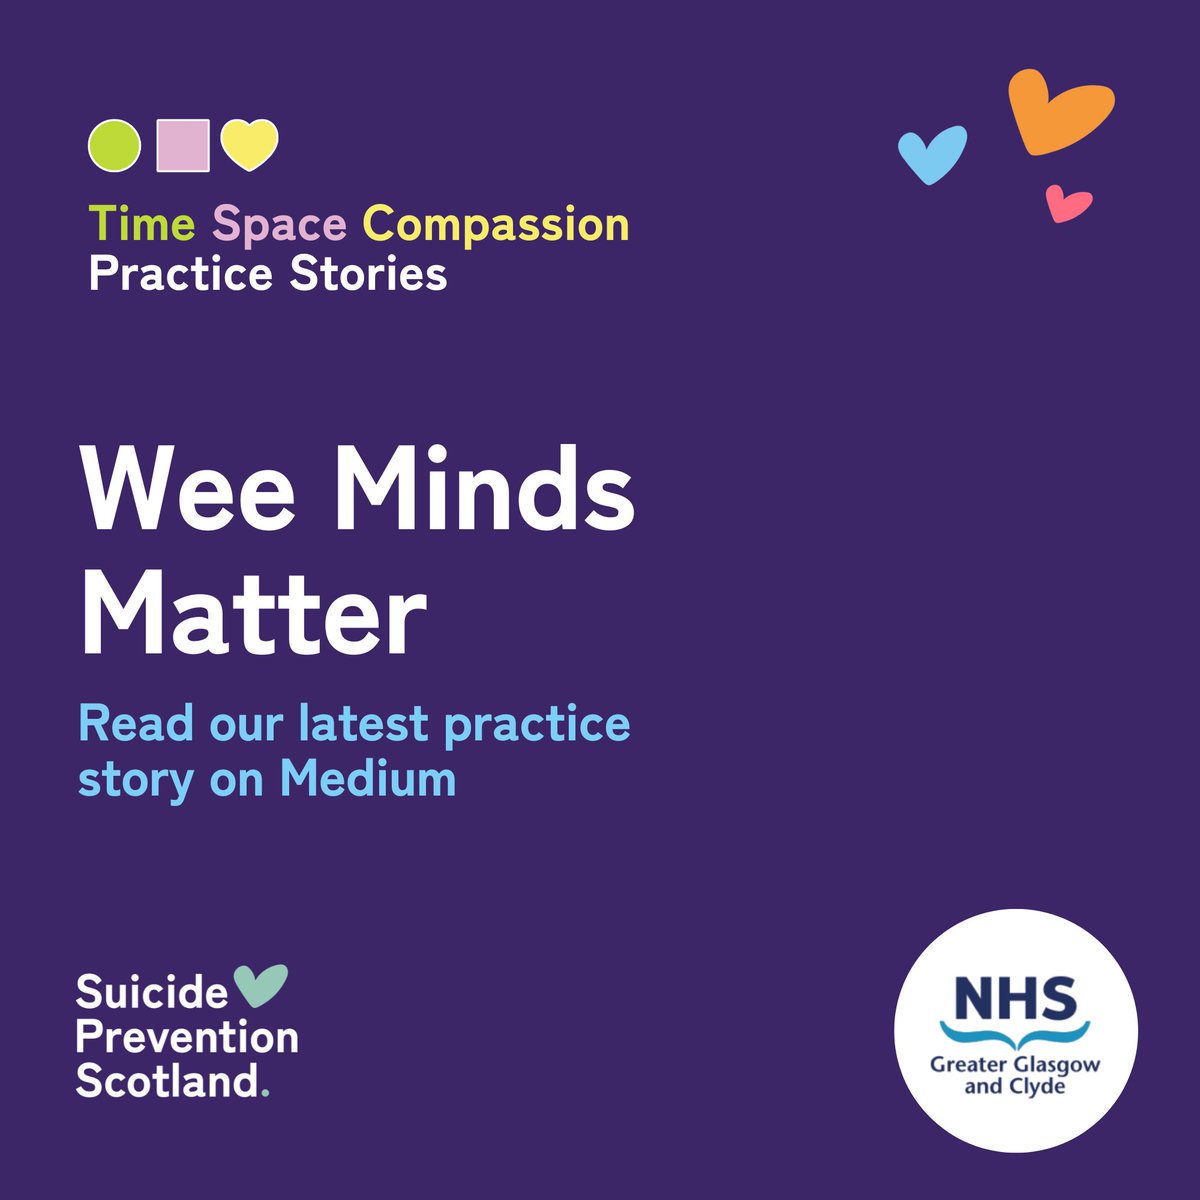 🆕 We're talking about perinatal mental health in our latest Time Space Compassion practice story, today. Learn about @NHSGGCKIDS Wee Minds Matter programme which supports infants and their parents. 📝 suicidepreventionscotland.medium.com/e7e22b5a5a50?s… 🔄 Please share 🟢🟪💛